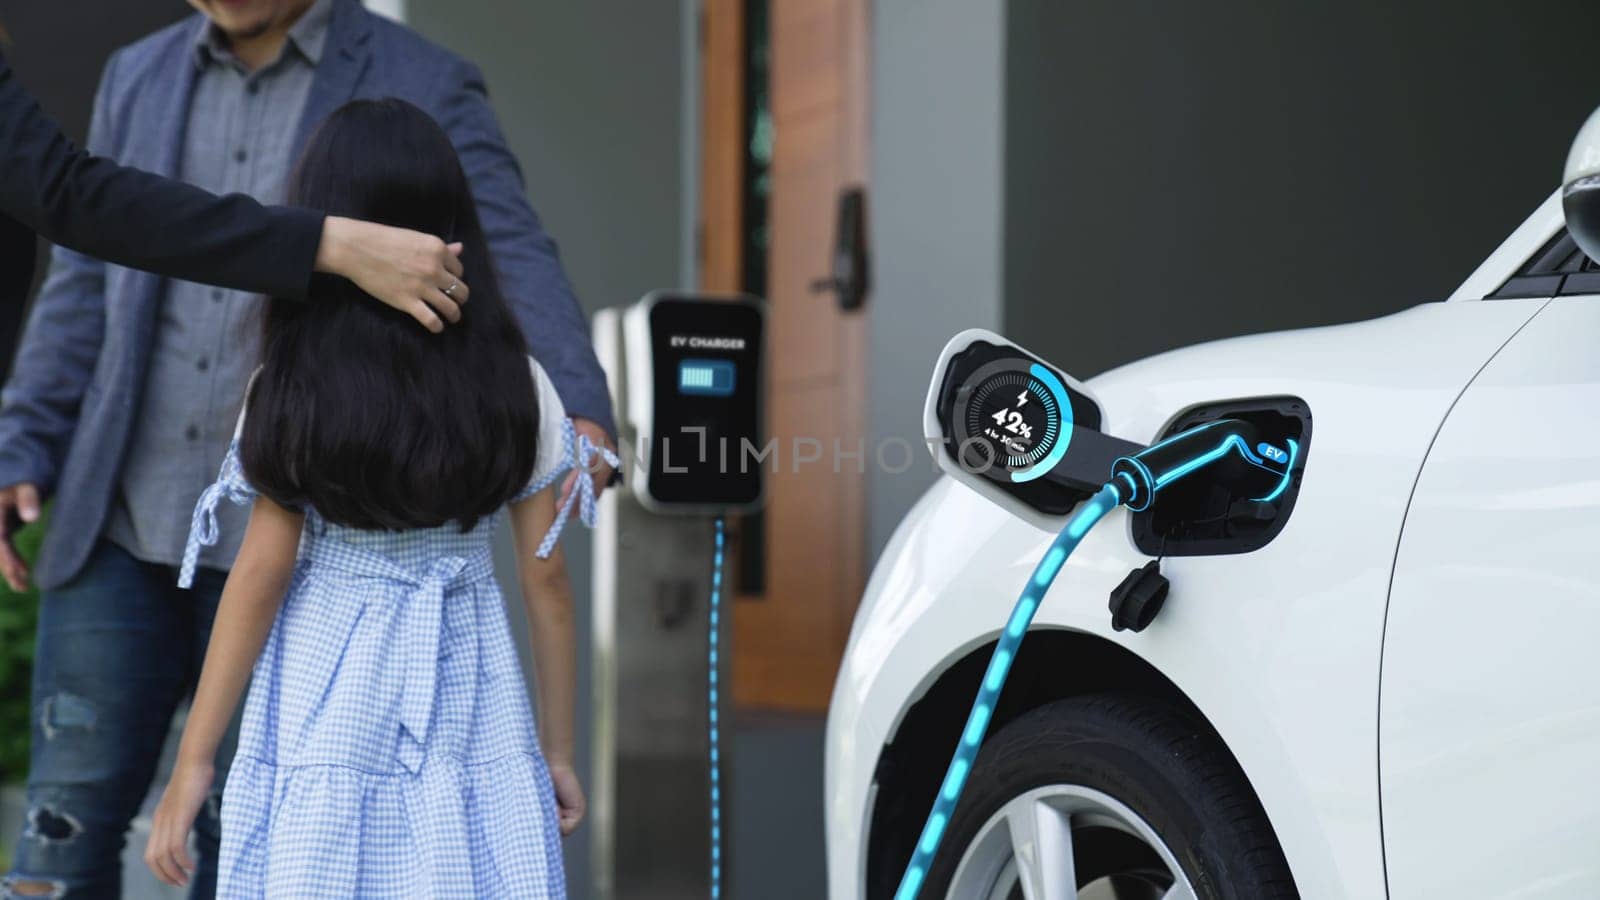 Modern family recharge electric car from home charging station. Peruse by biancoblue